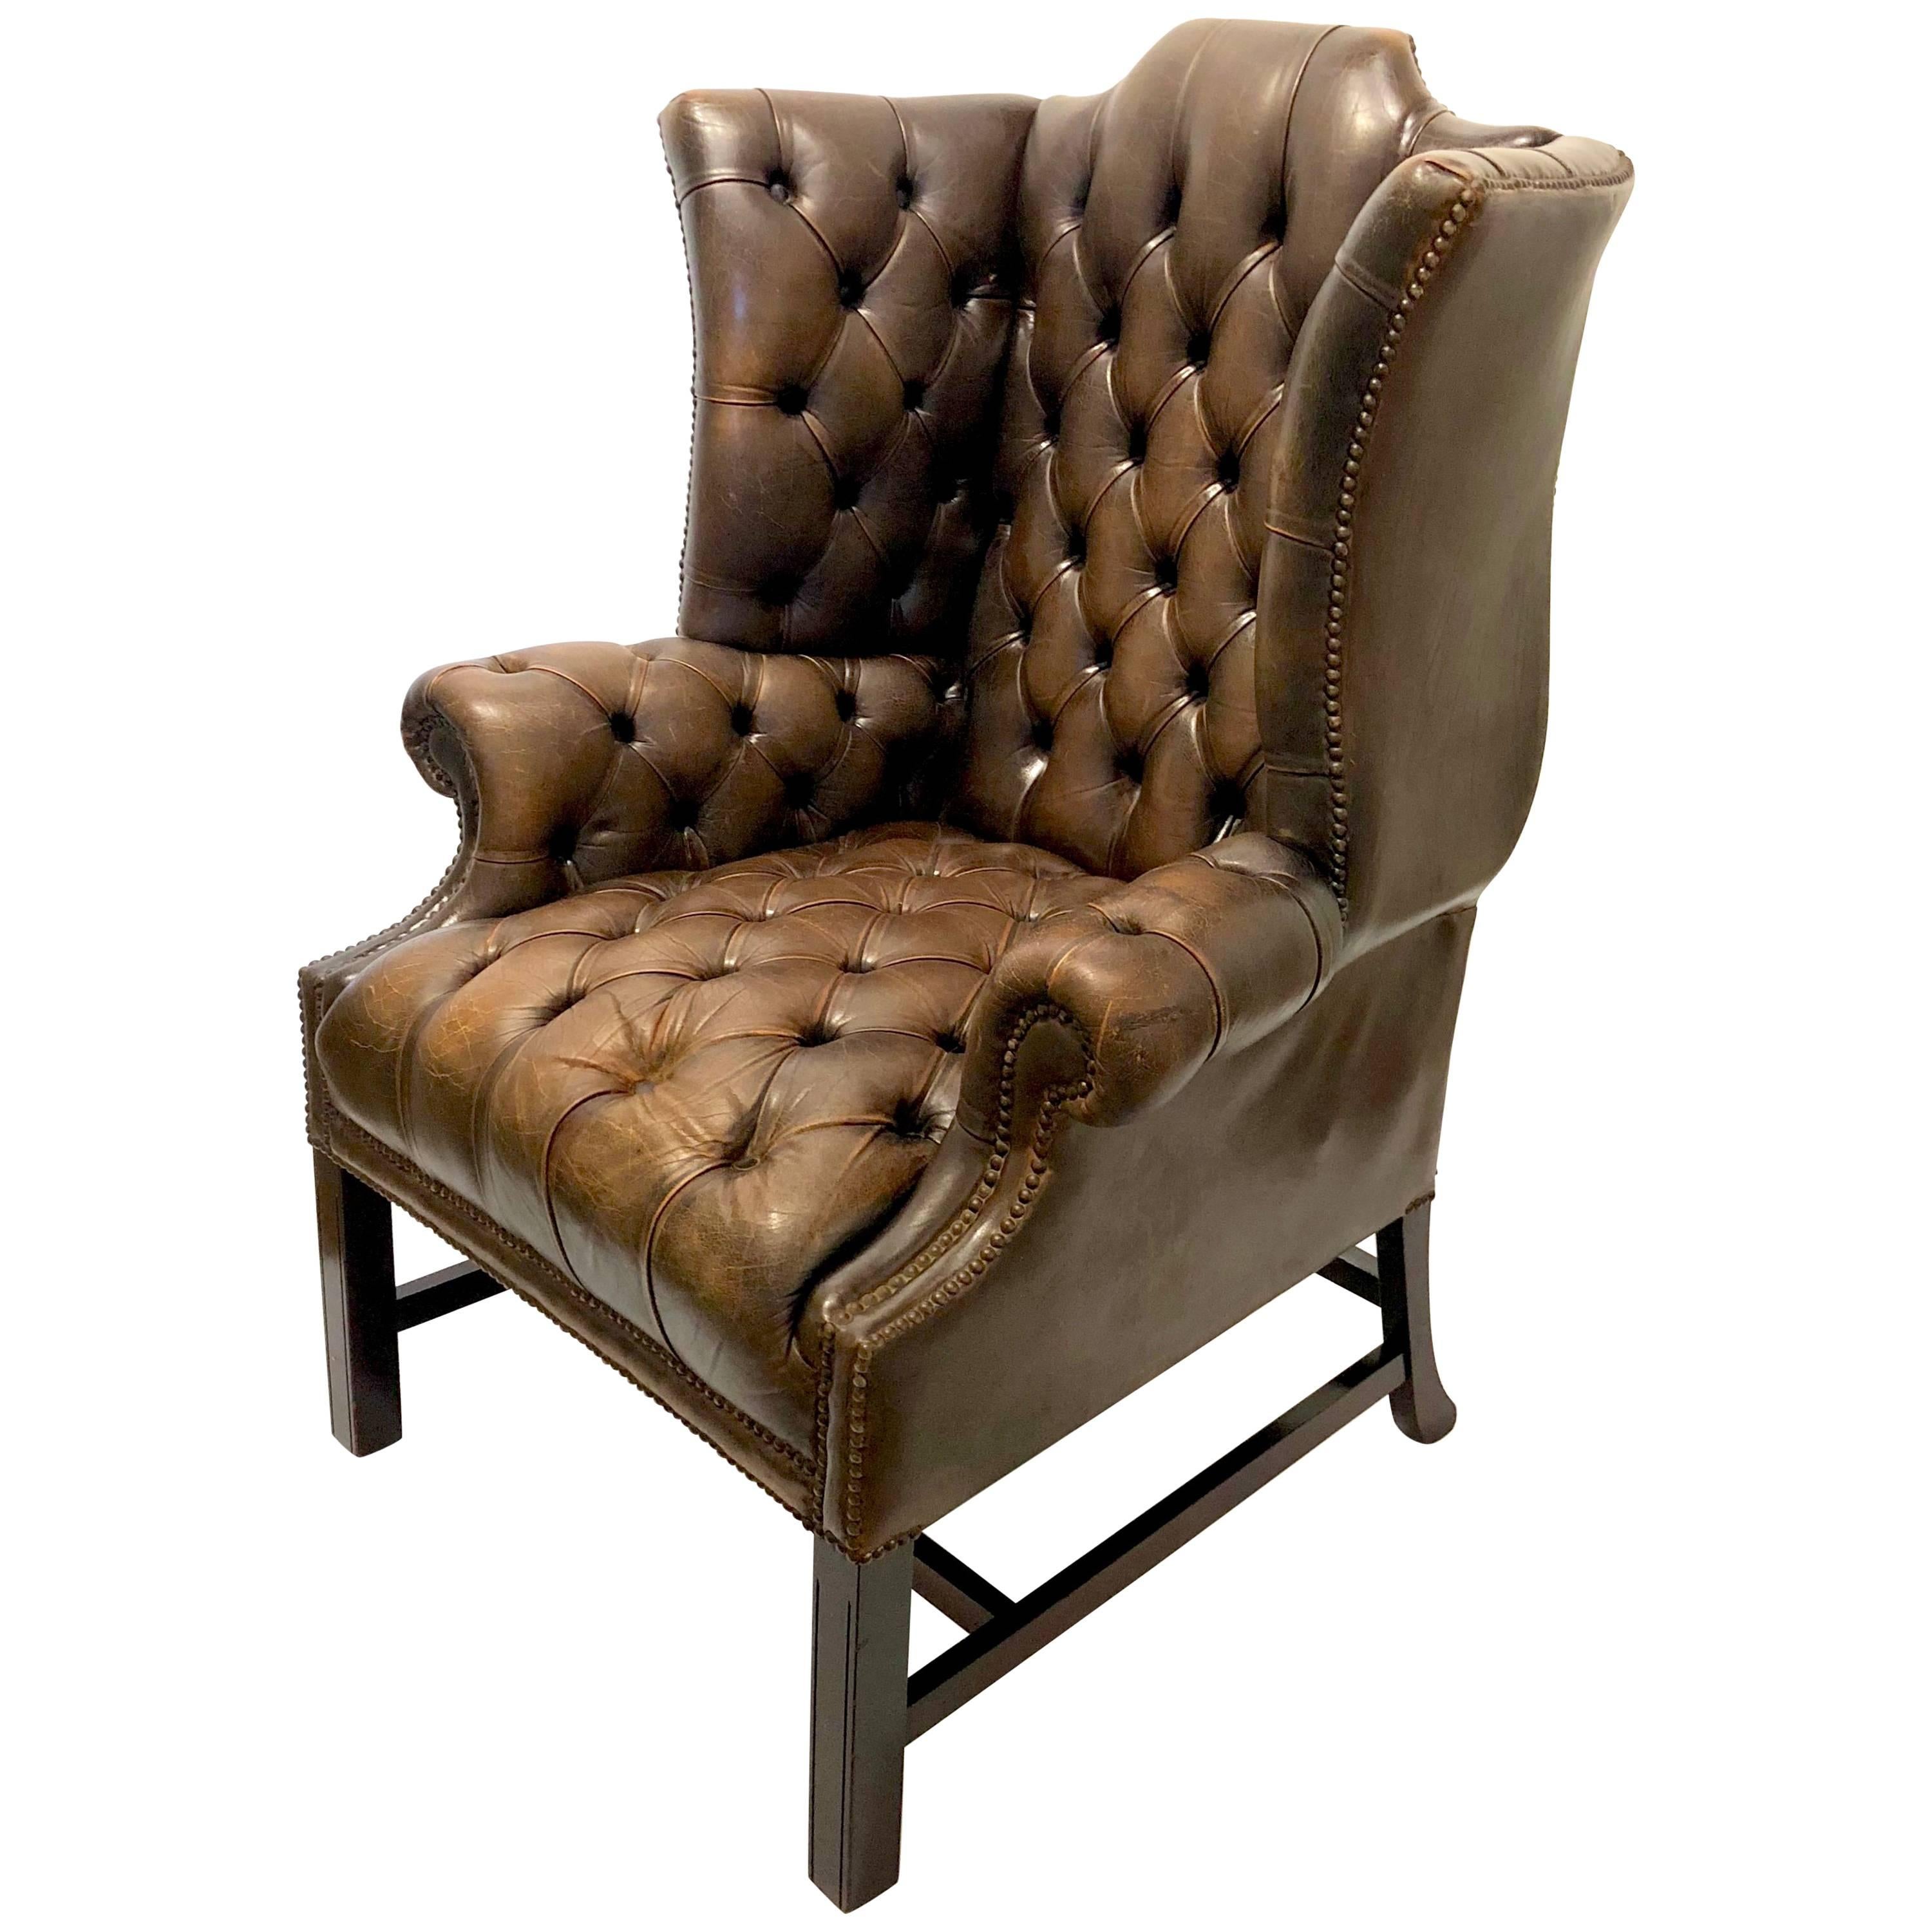 Antique Chesterfield Tufted Distressed Leather Tall Wingback Chair in Brown